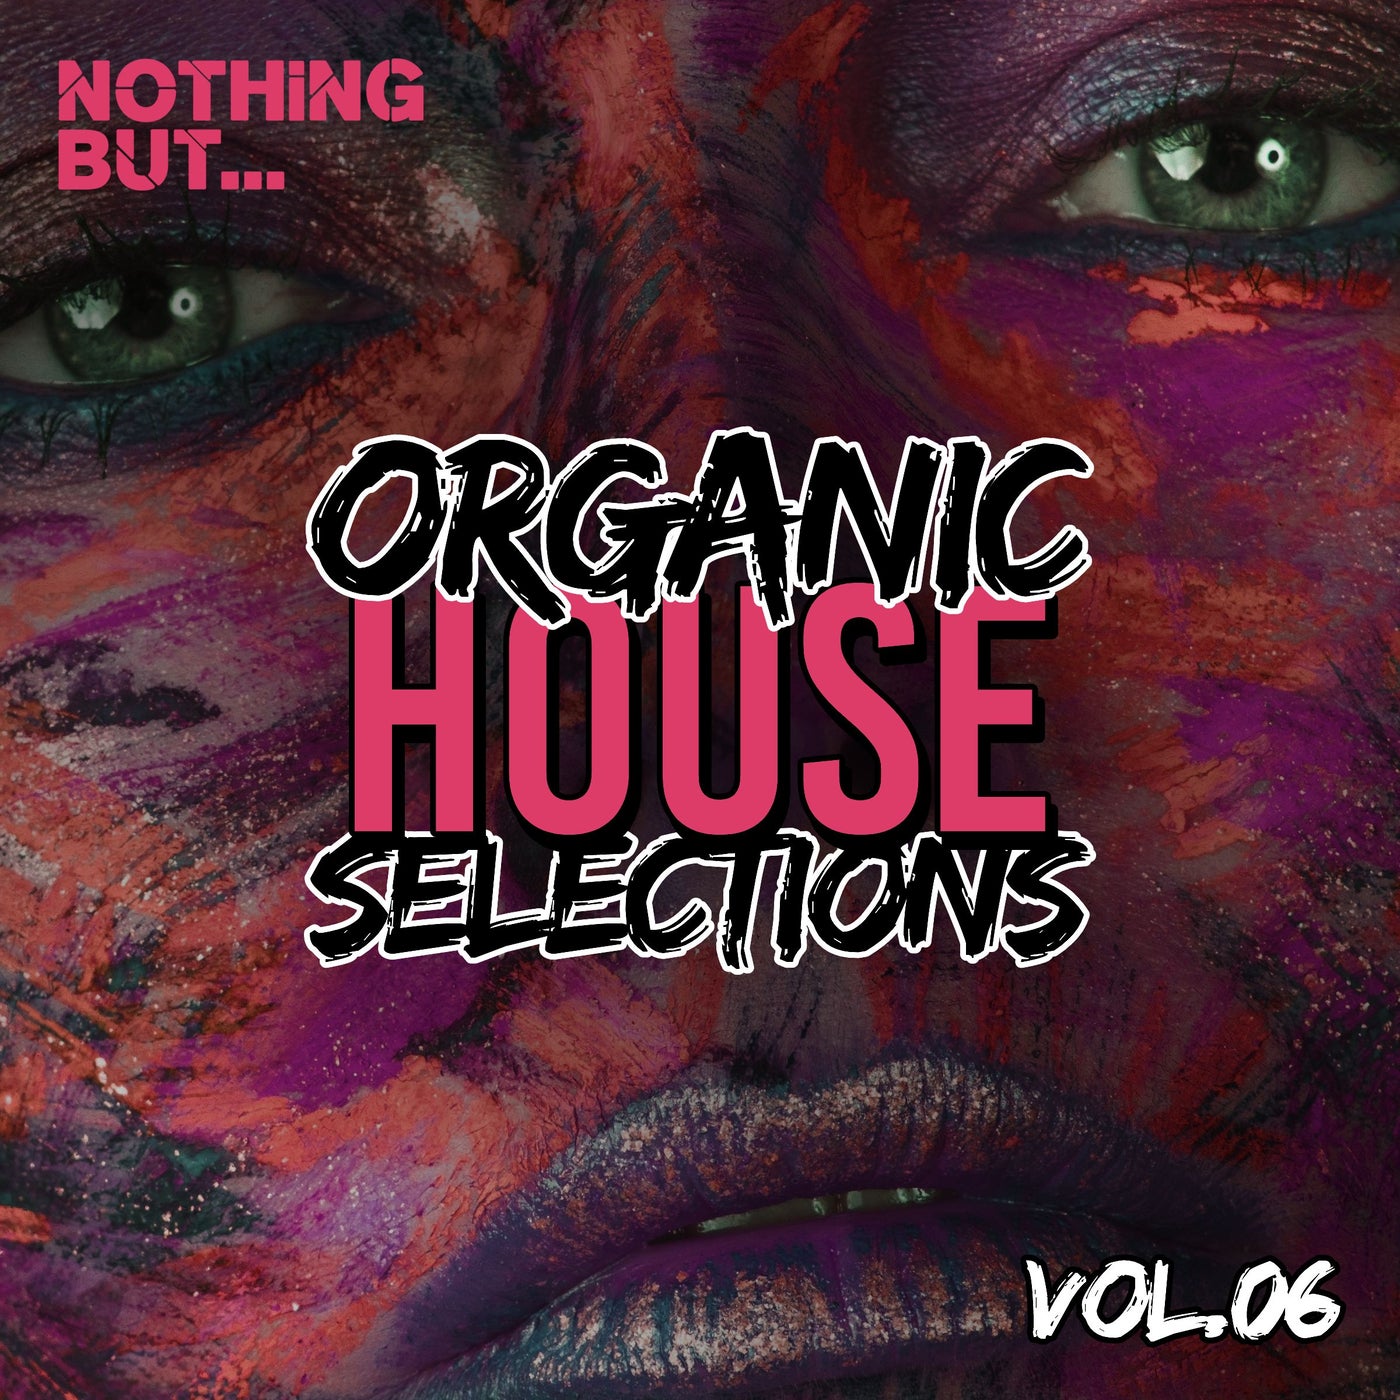 Nothing But... Organic House Selections, Vol. 06